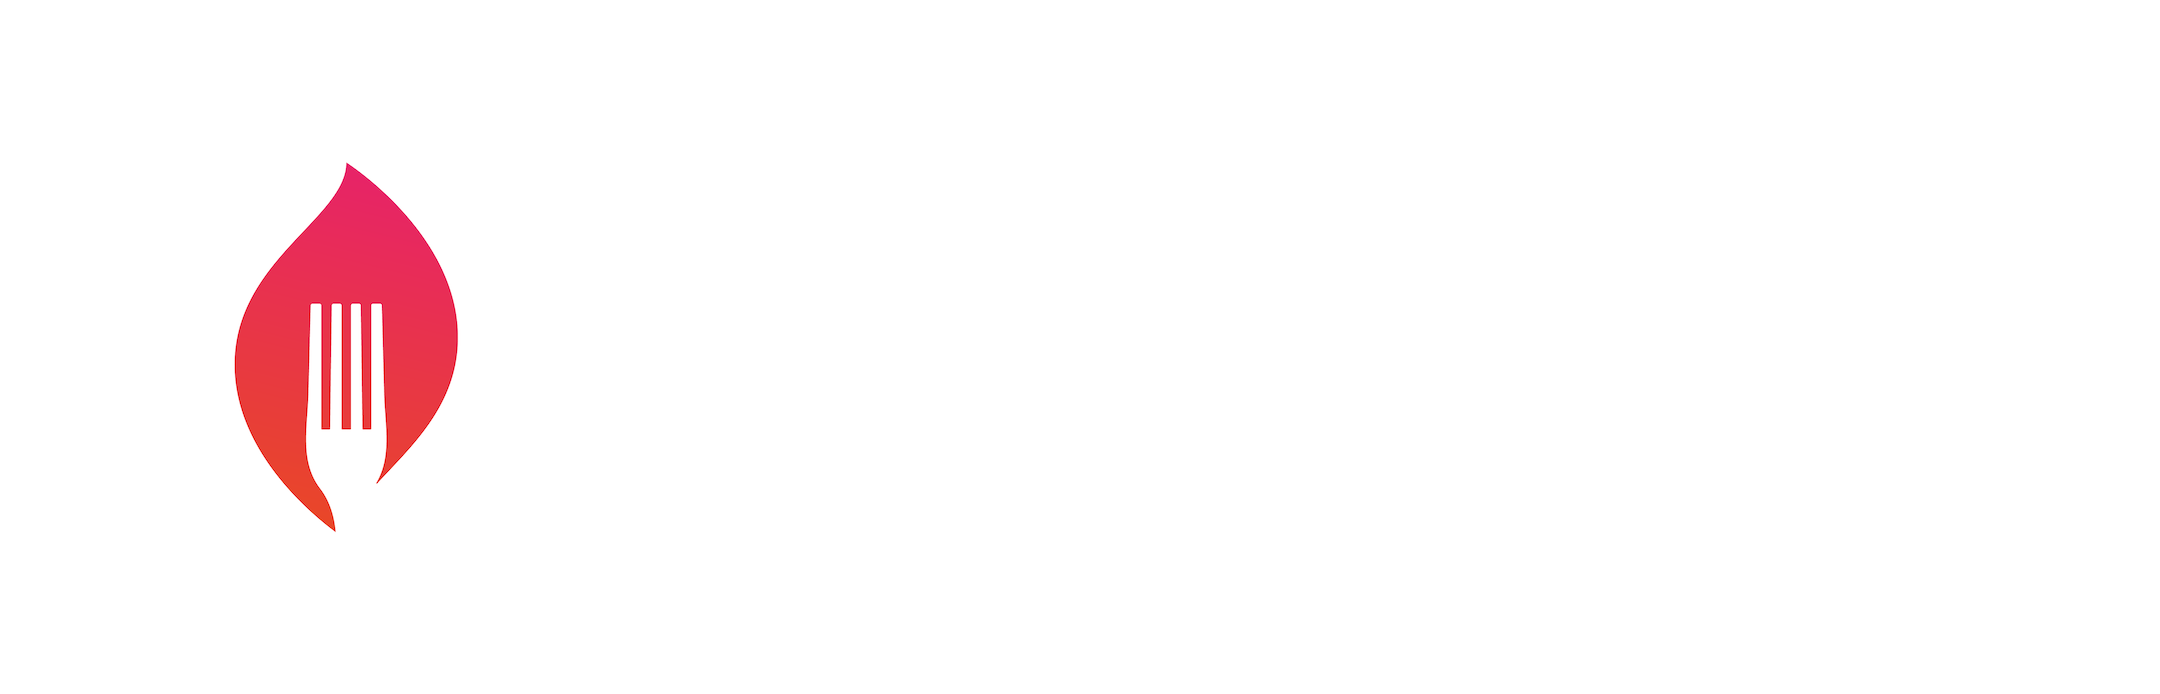 Fired Up Food Marketing